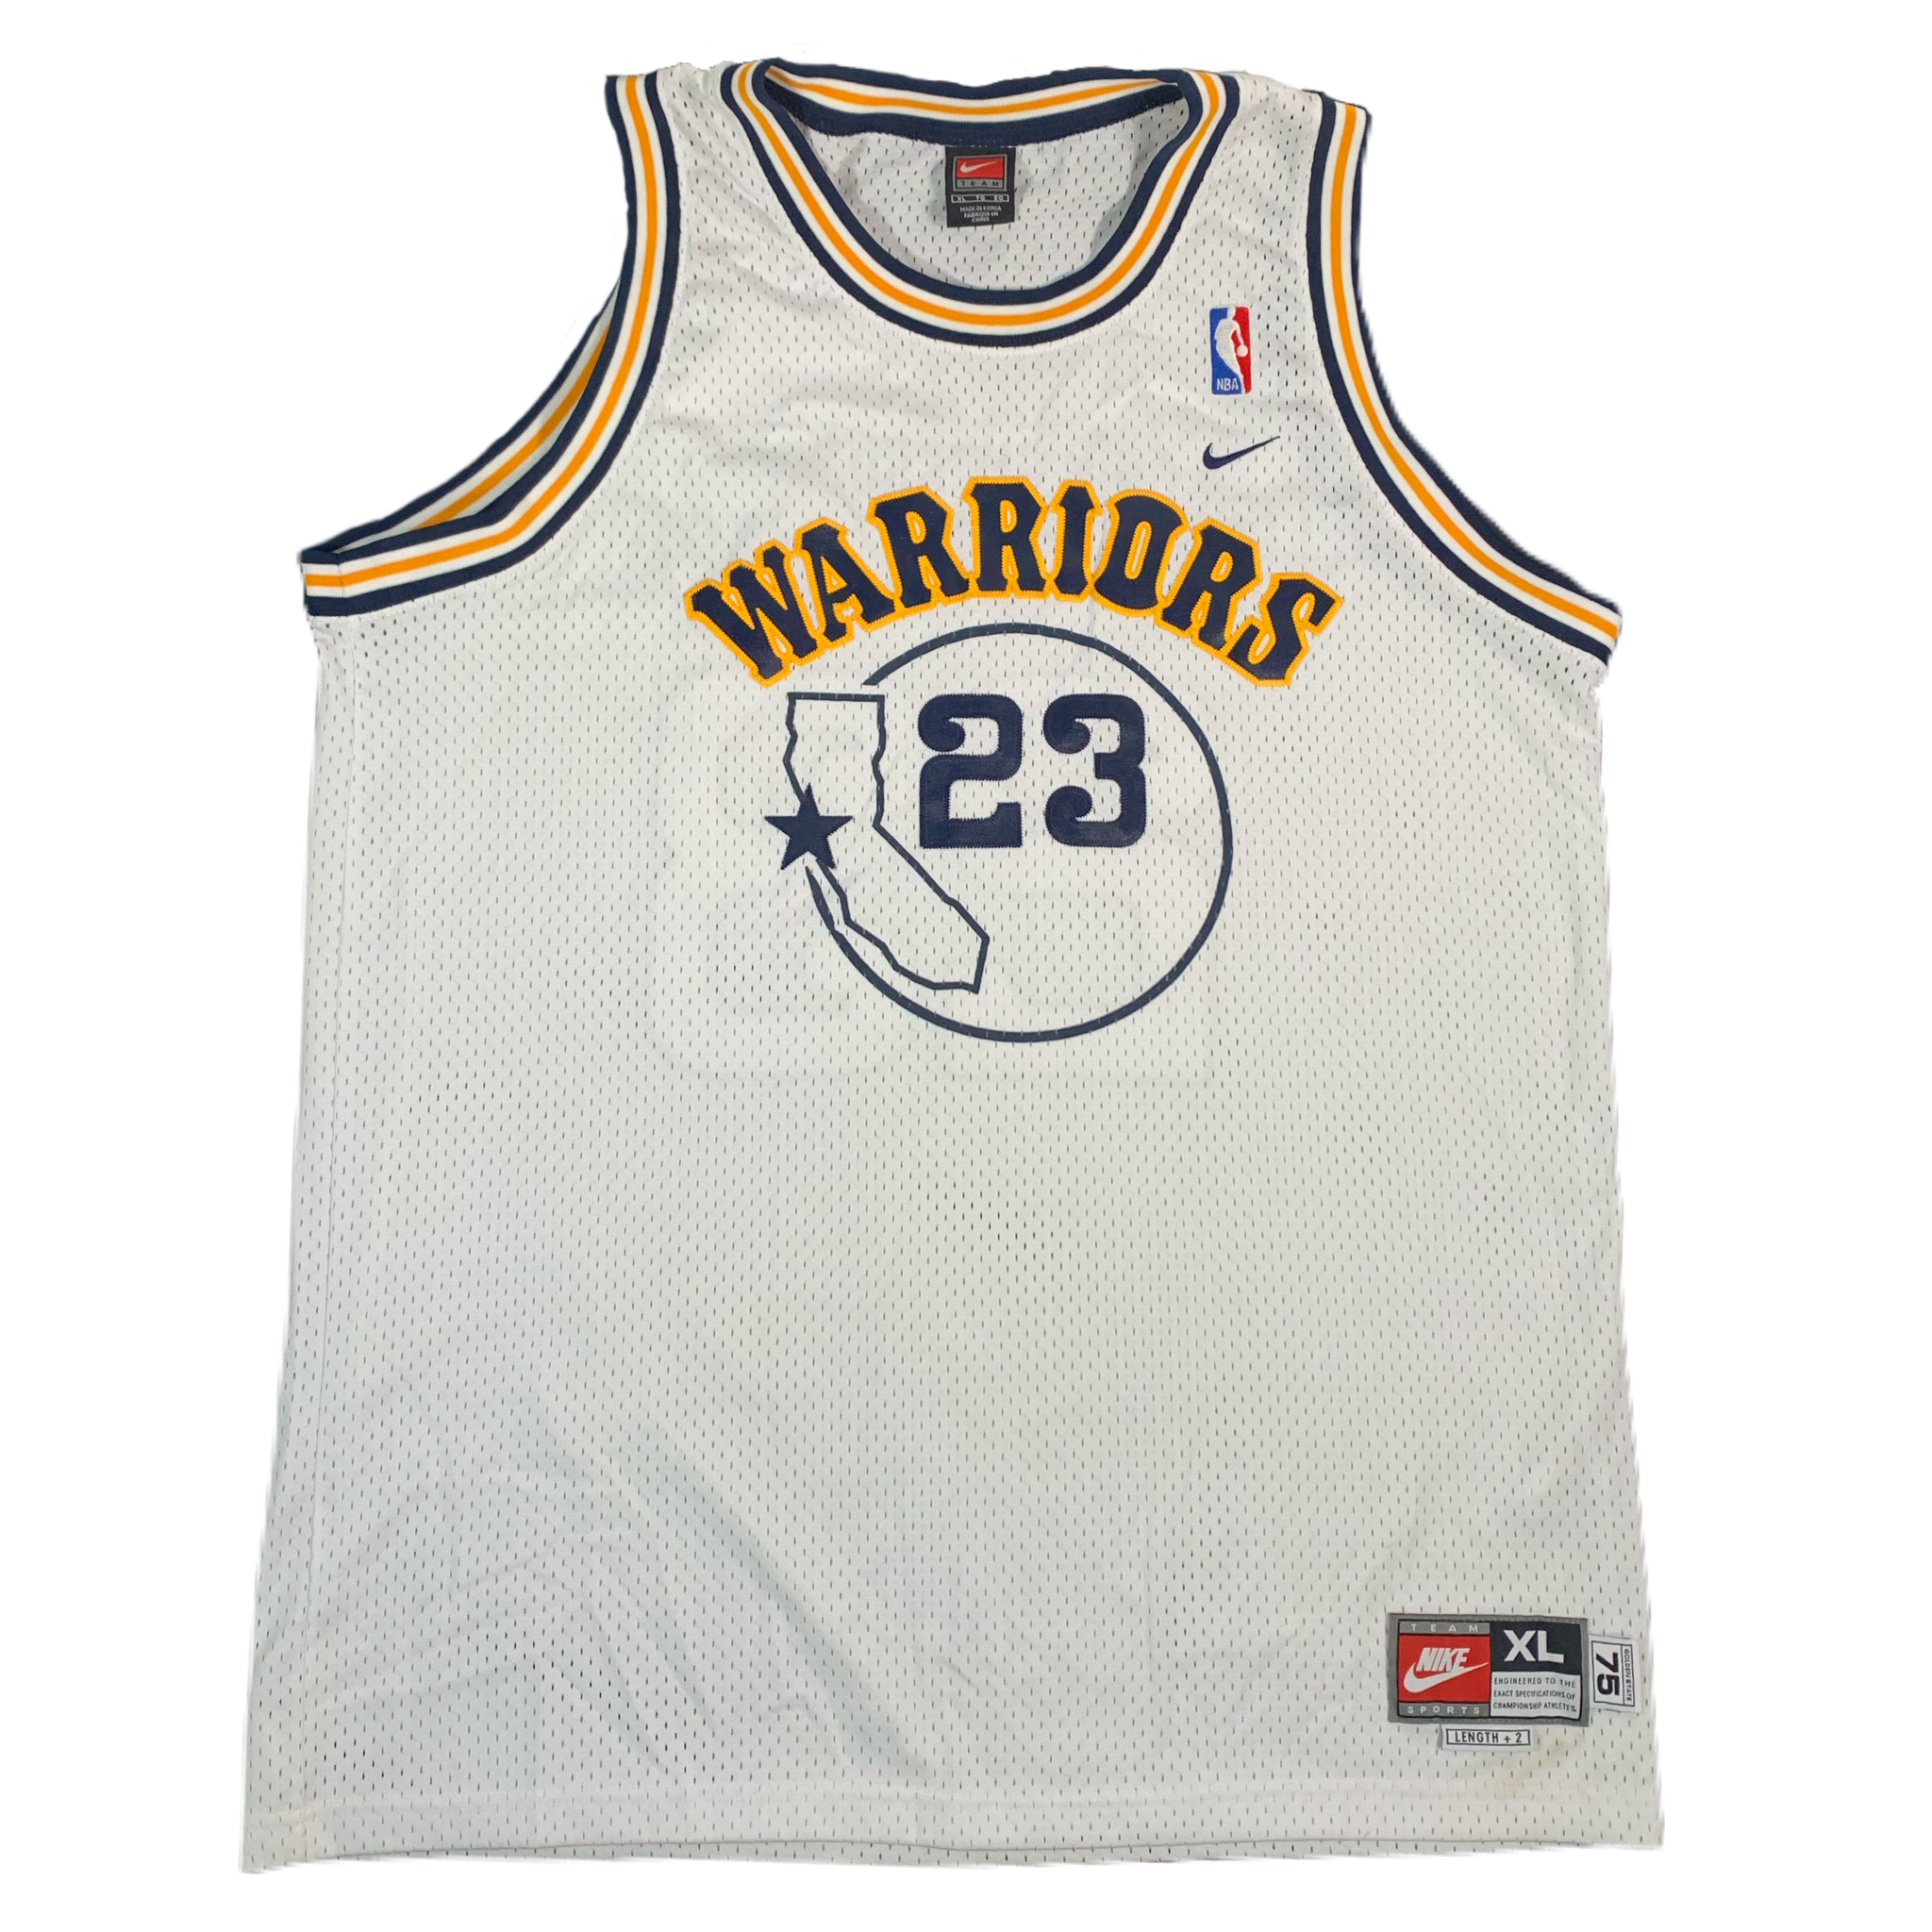 where can i buy a golden state warriors jersey